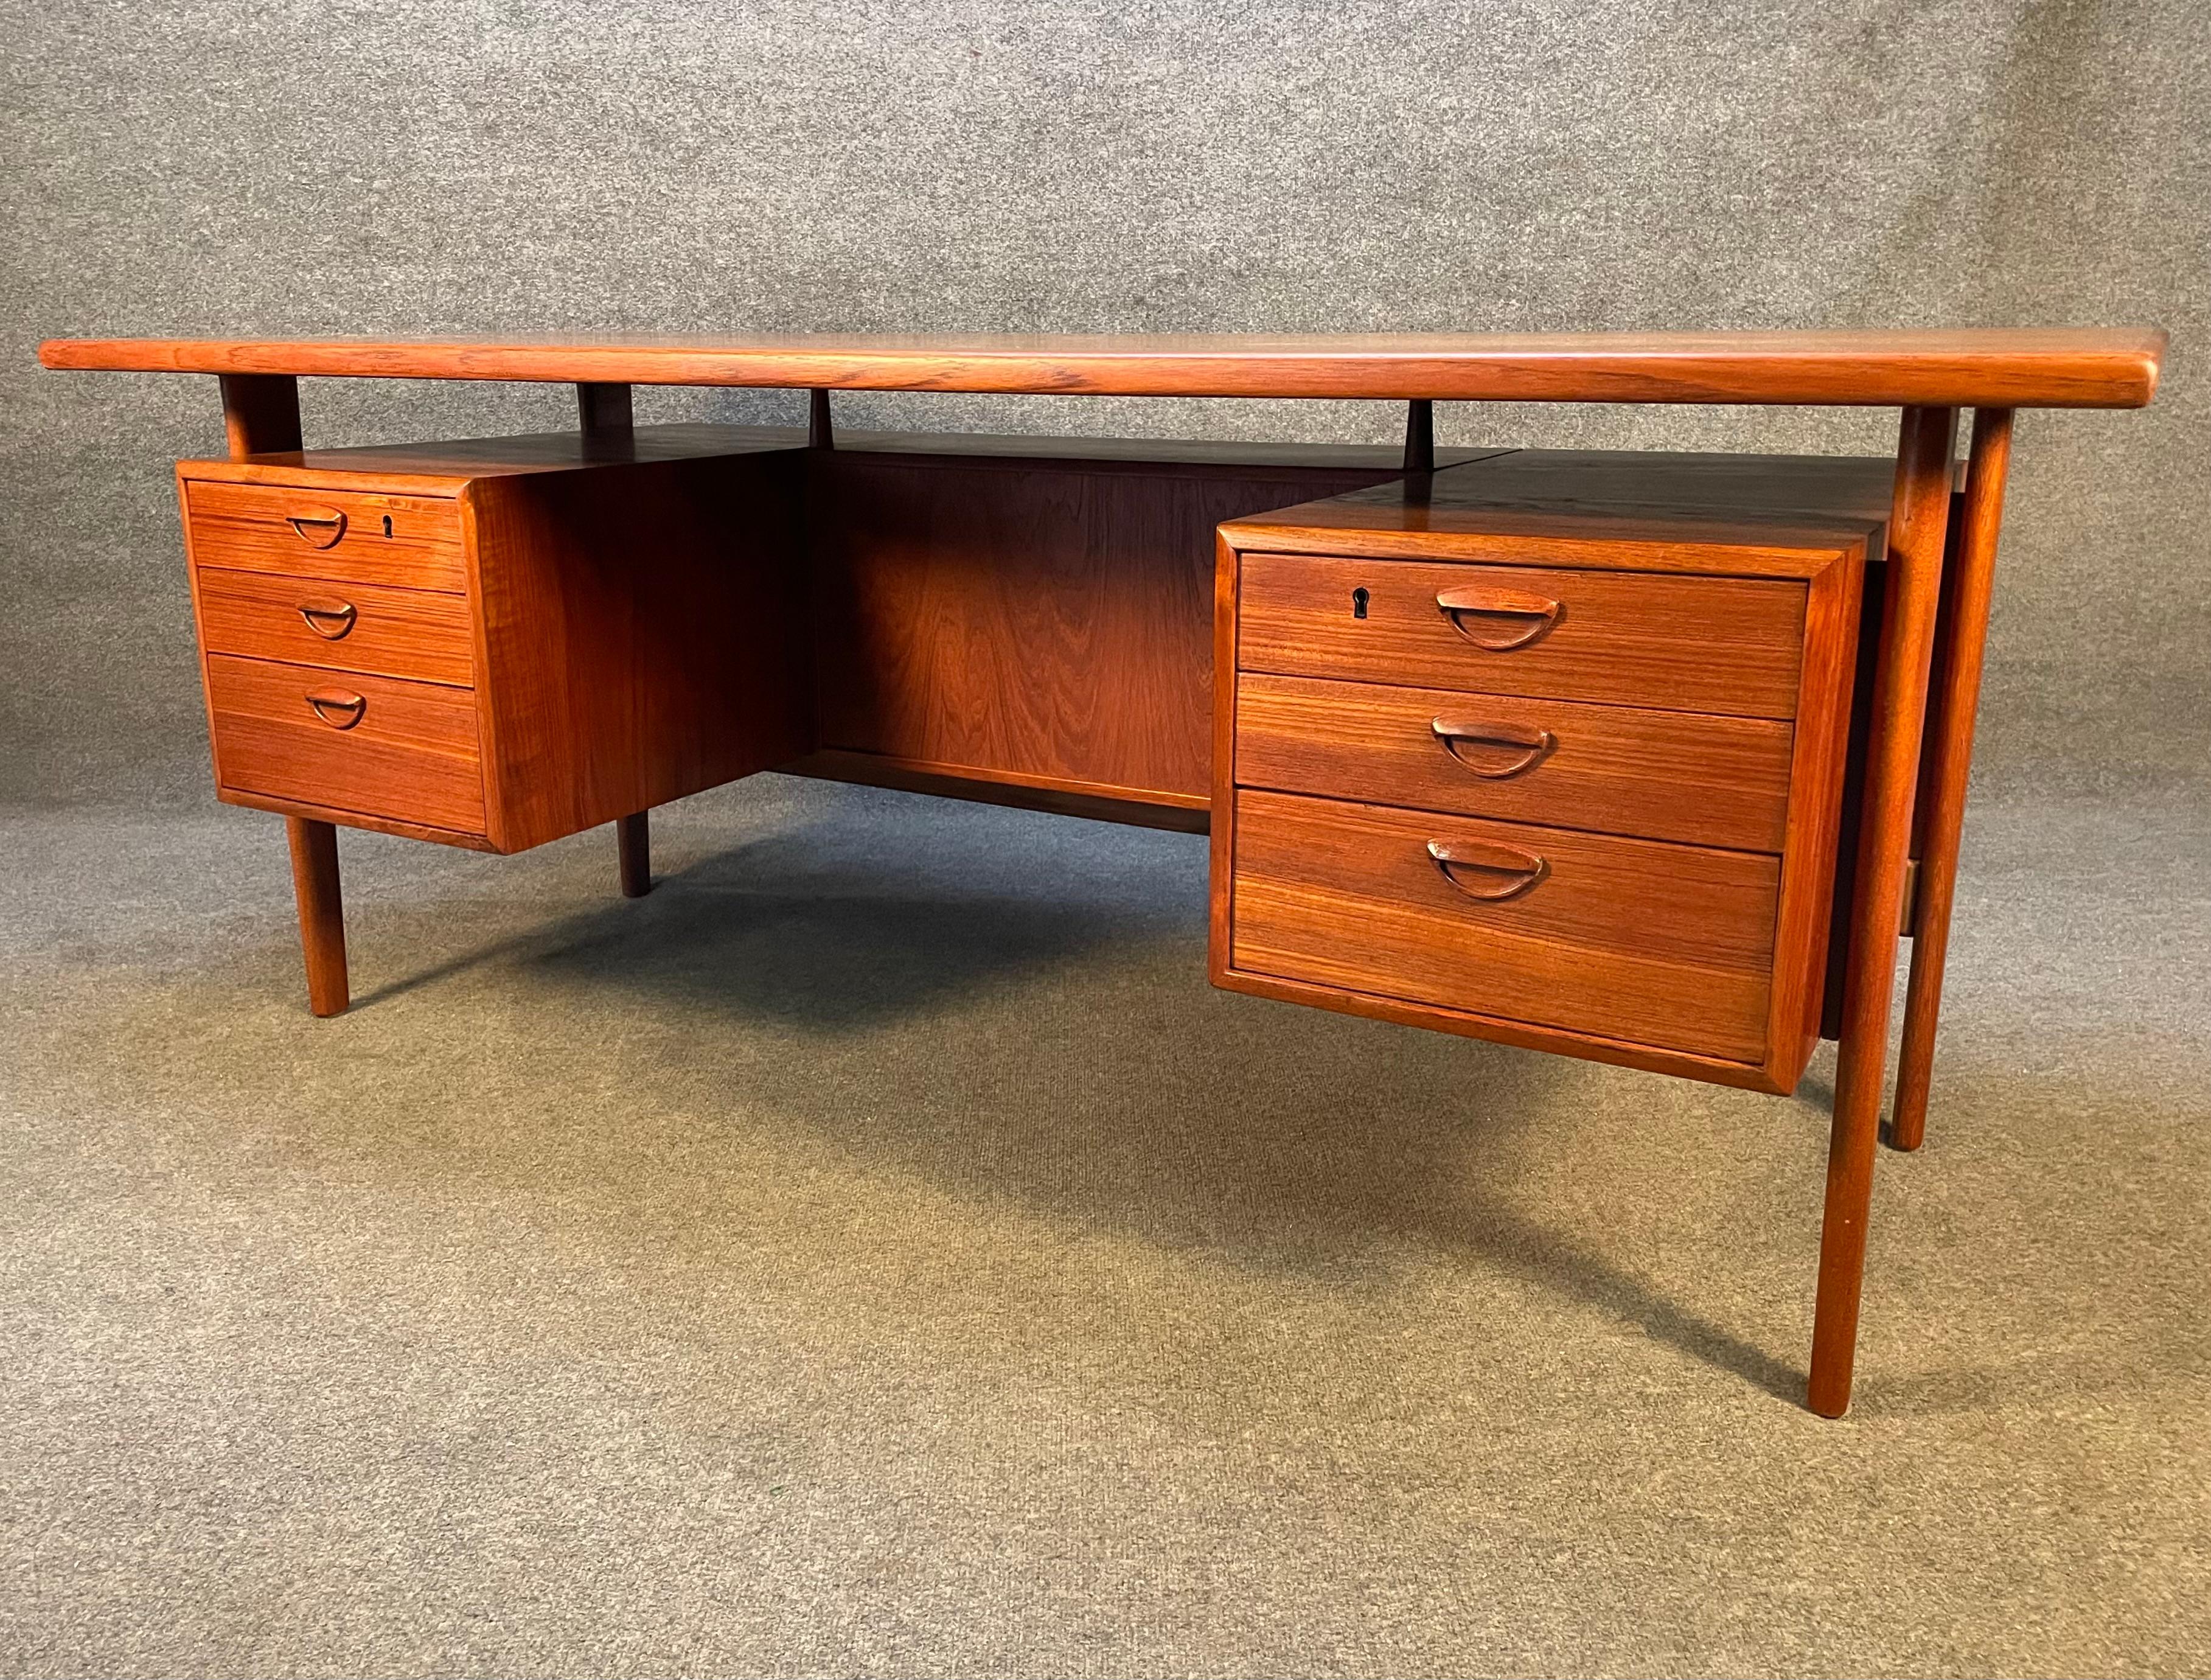 Here is the large version of the sought after Scandinavian Modern executive floating desk Model FM60 in teak designed by Kai Kristiansen and manufactured by Feldballe's Møbelfabrik in Denmark in the 1960's.
The desk features vibrant wood grain